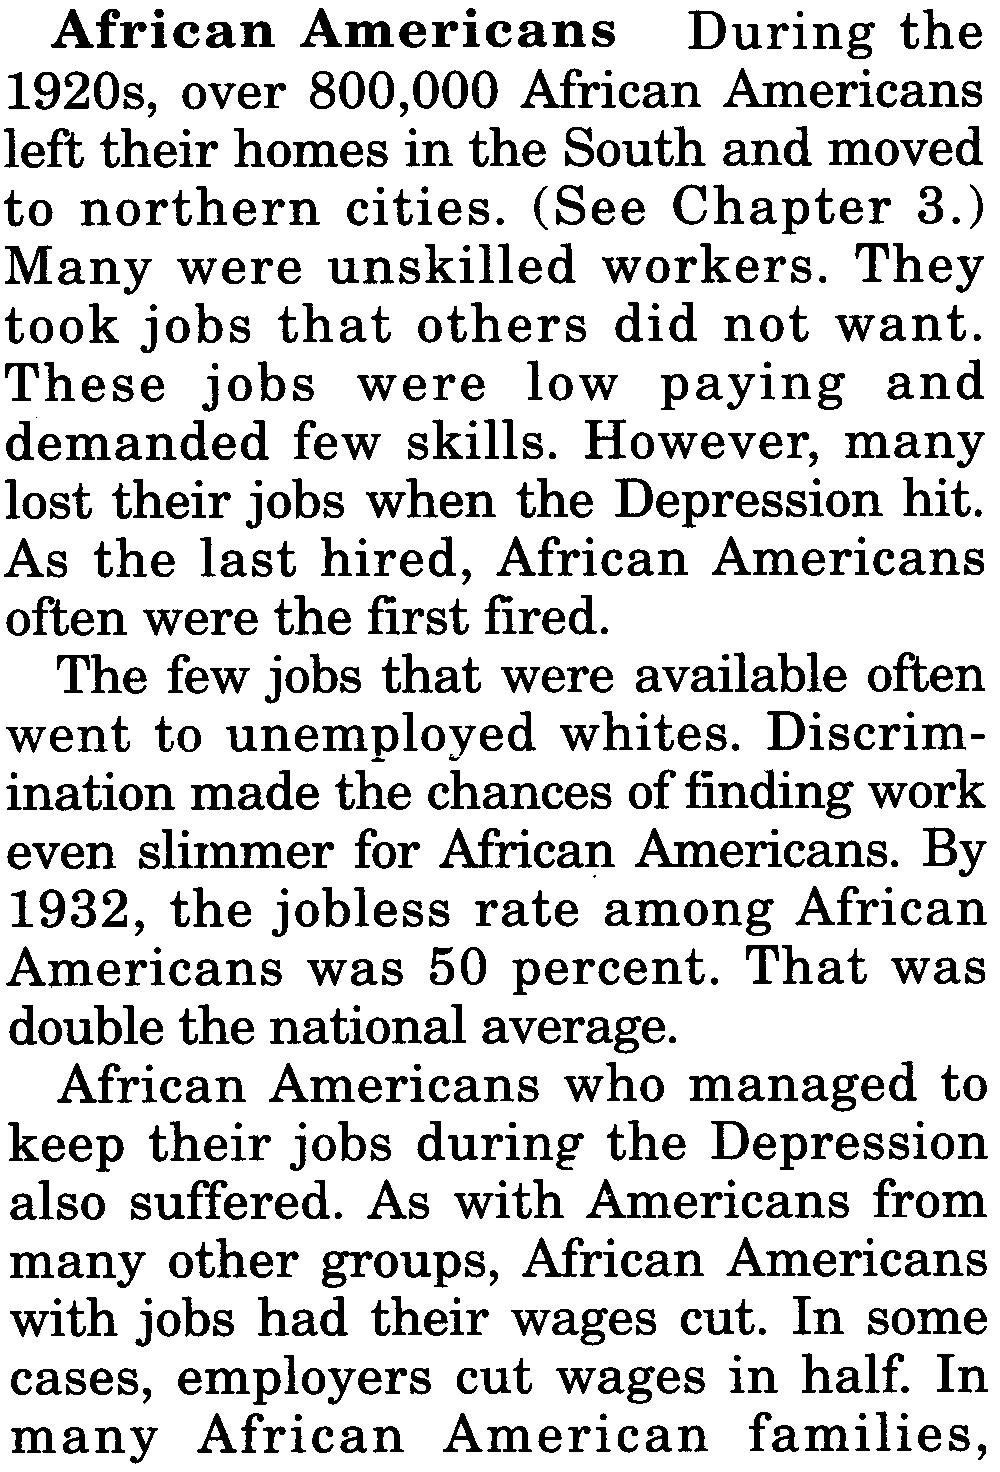 Discrimination made the chances of finding work even slimmer for Mrican Americans. By 1932, the jobless rate among African Americans was 50 percent. That was double the national average.